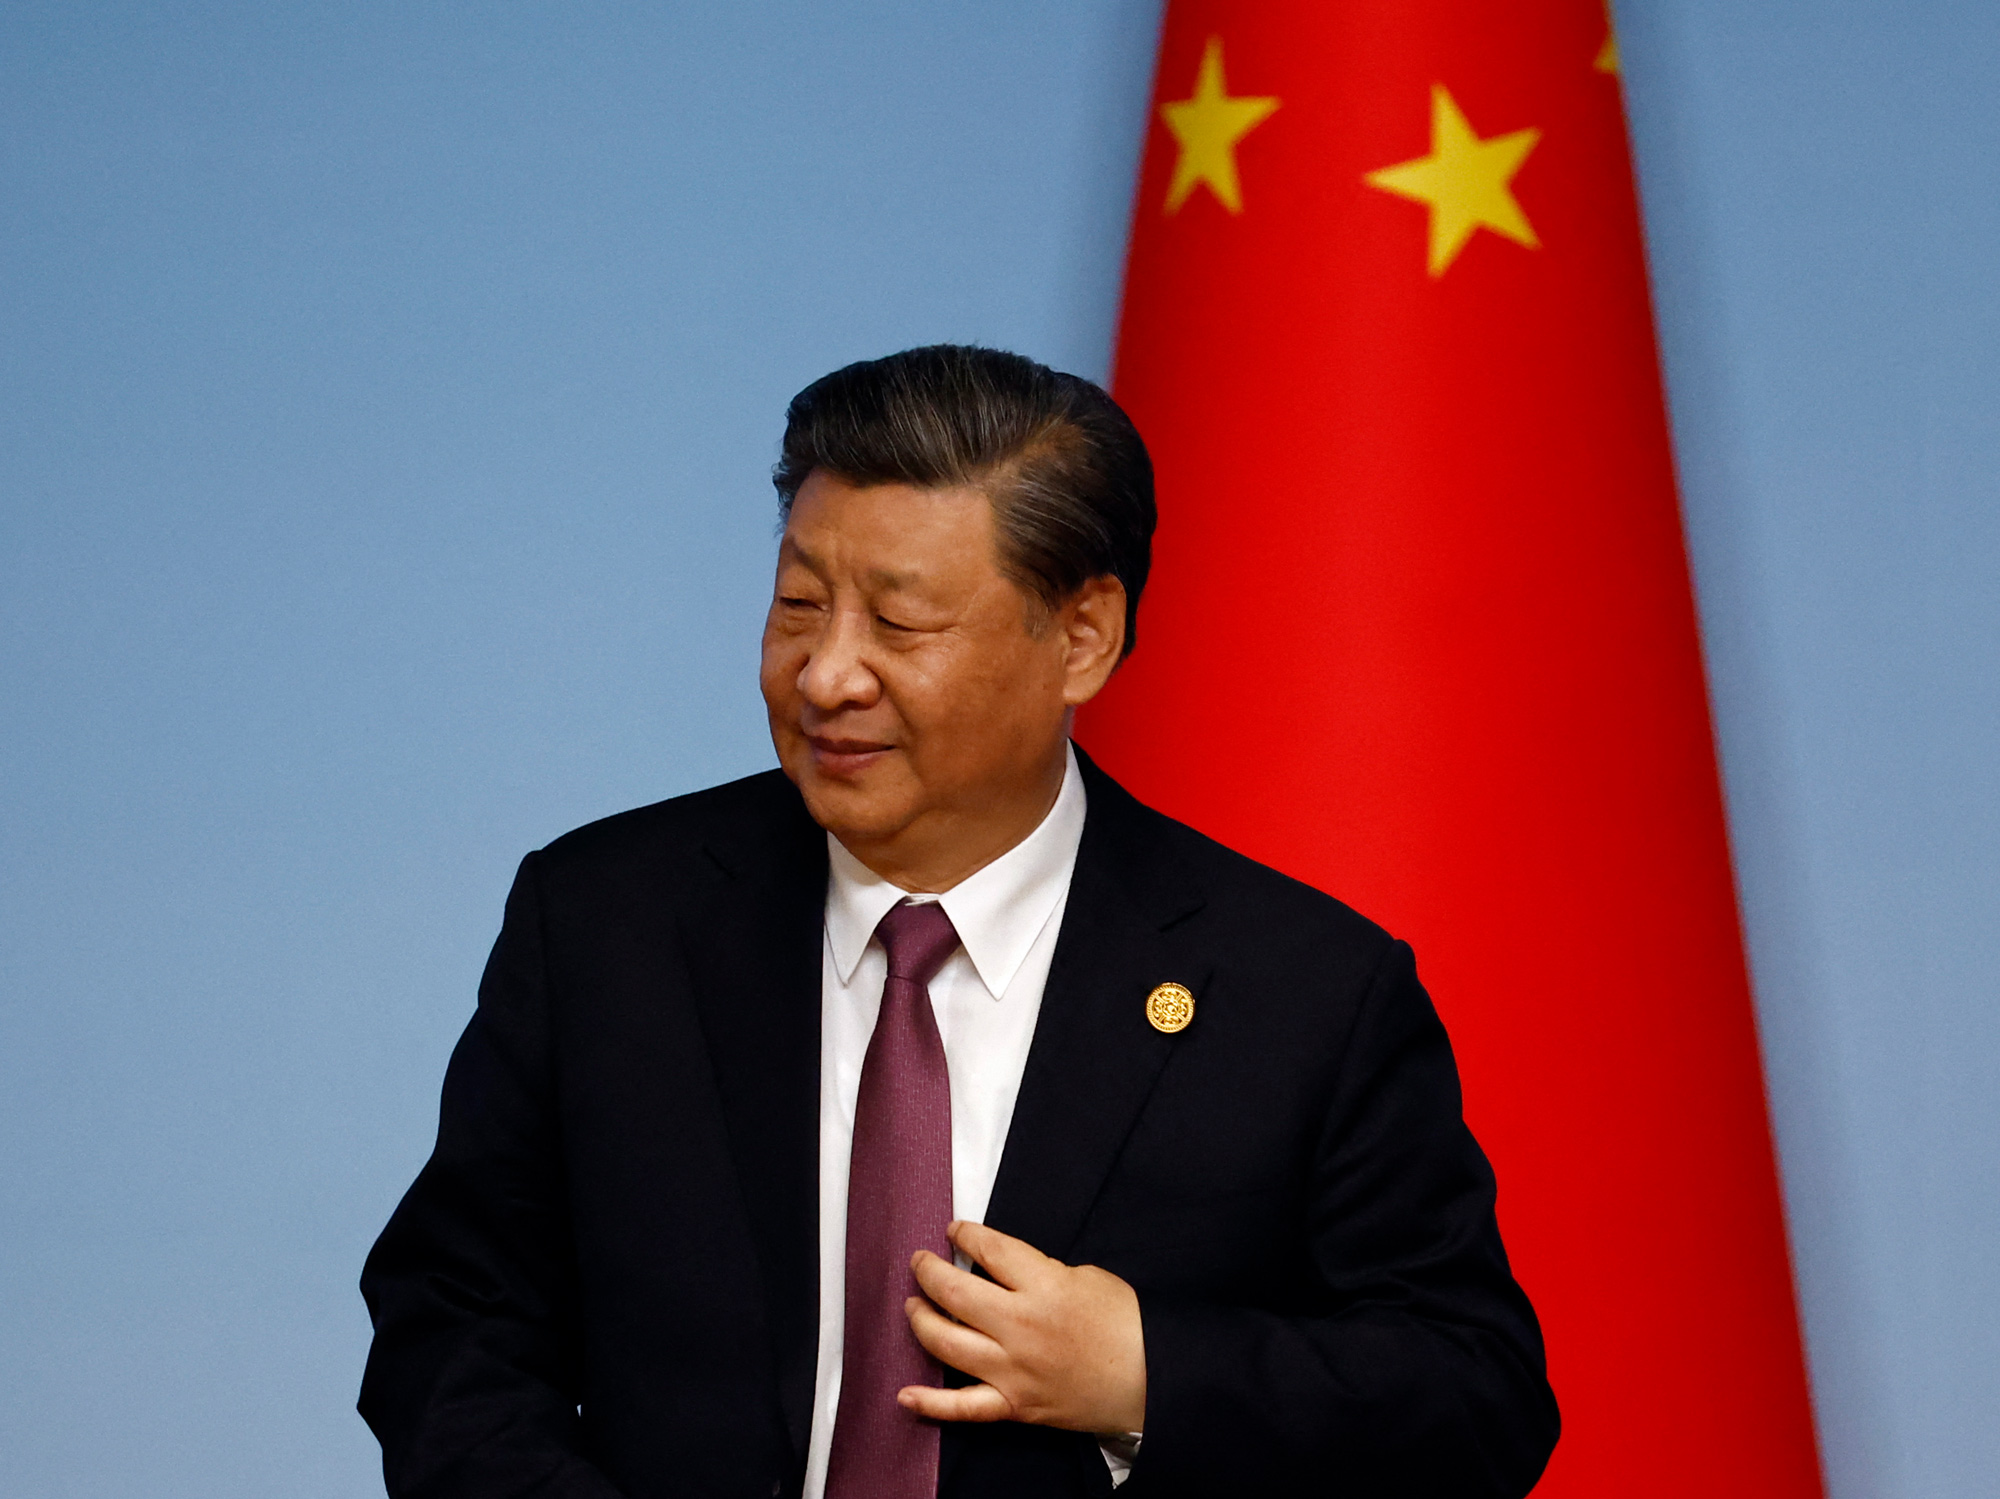 Another billionaire business leader is set to visit China